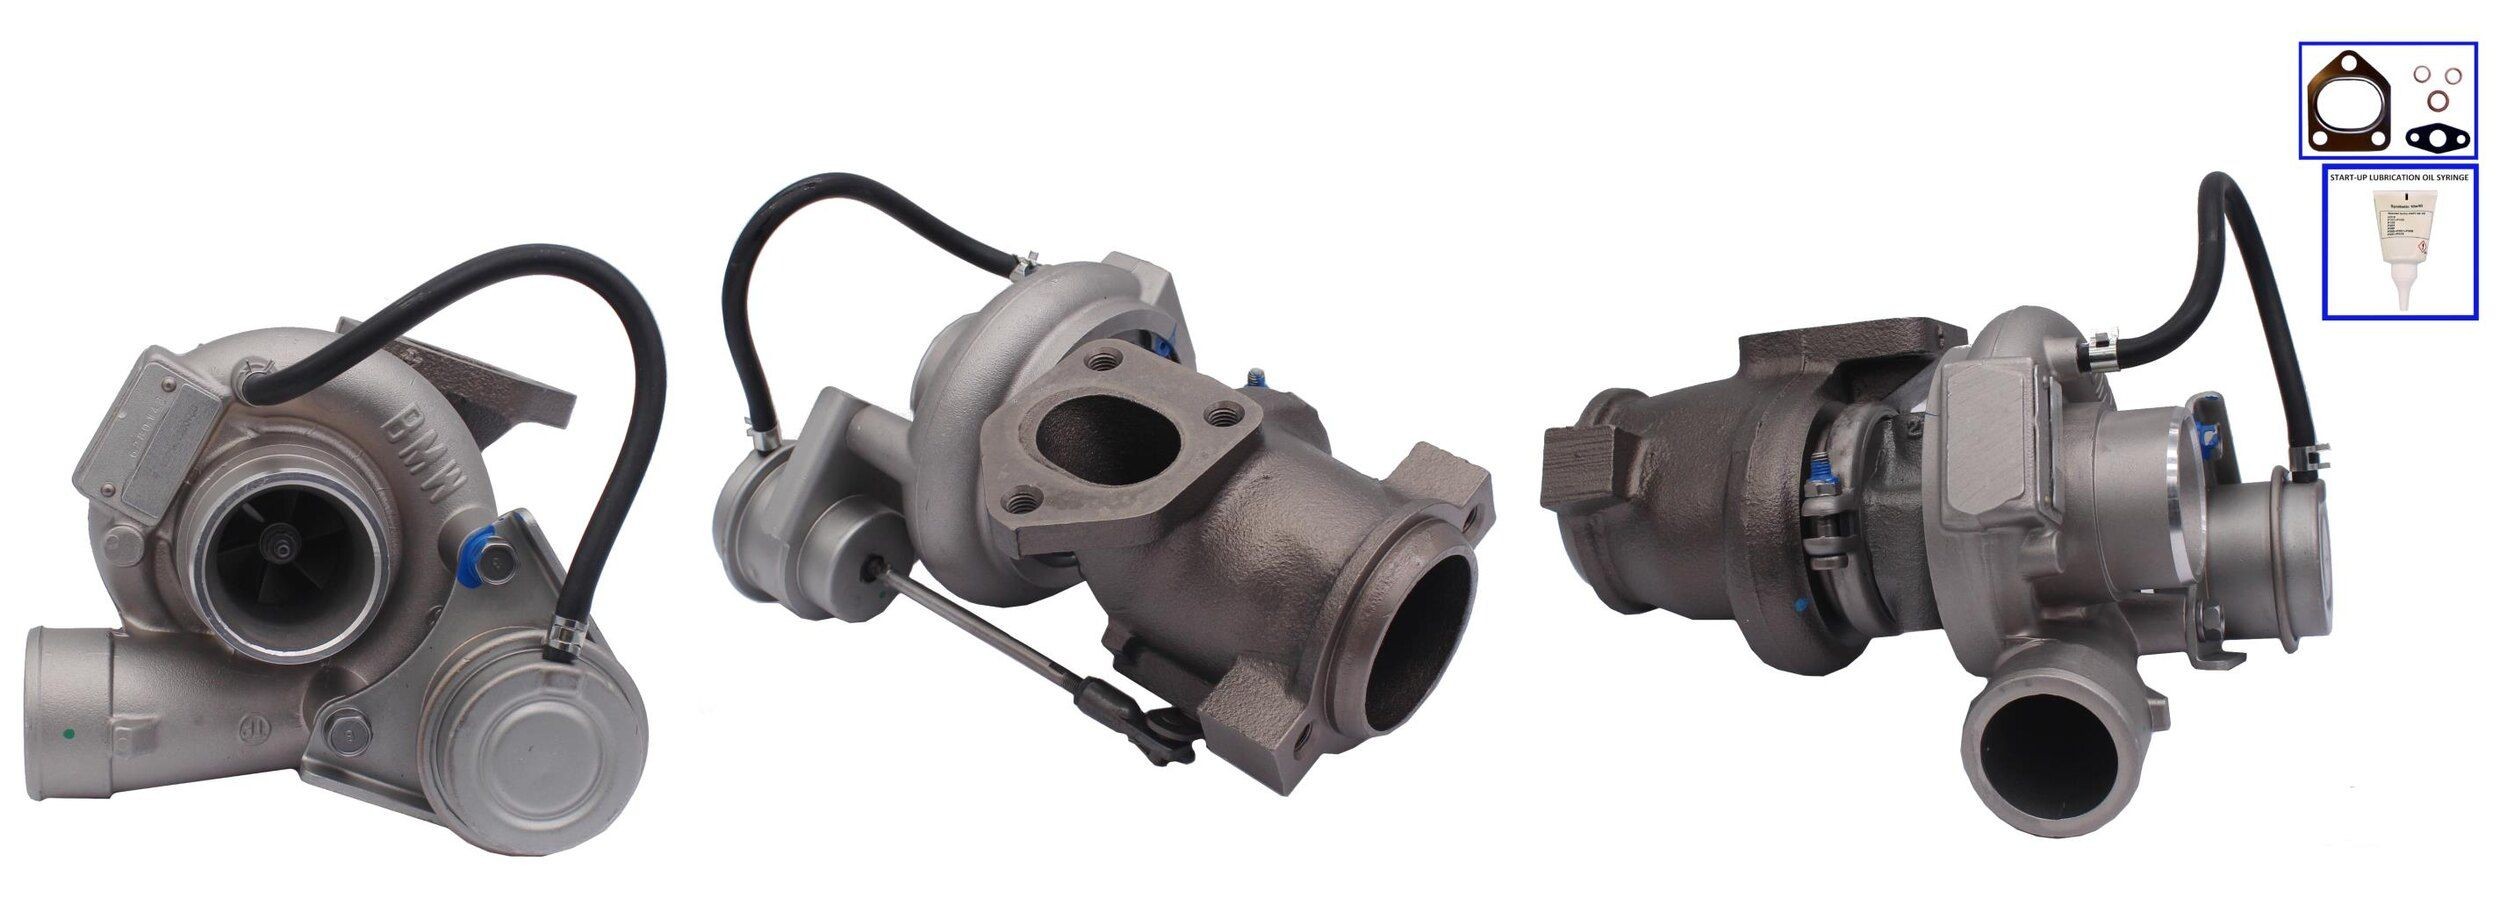 ELSTOCK Exhaust Turbocharger, Pneumatically controlled actuator, with gaskets/seals Turbo 91-0737 buy